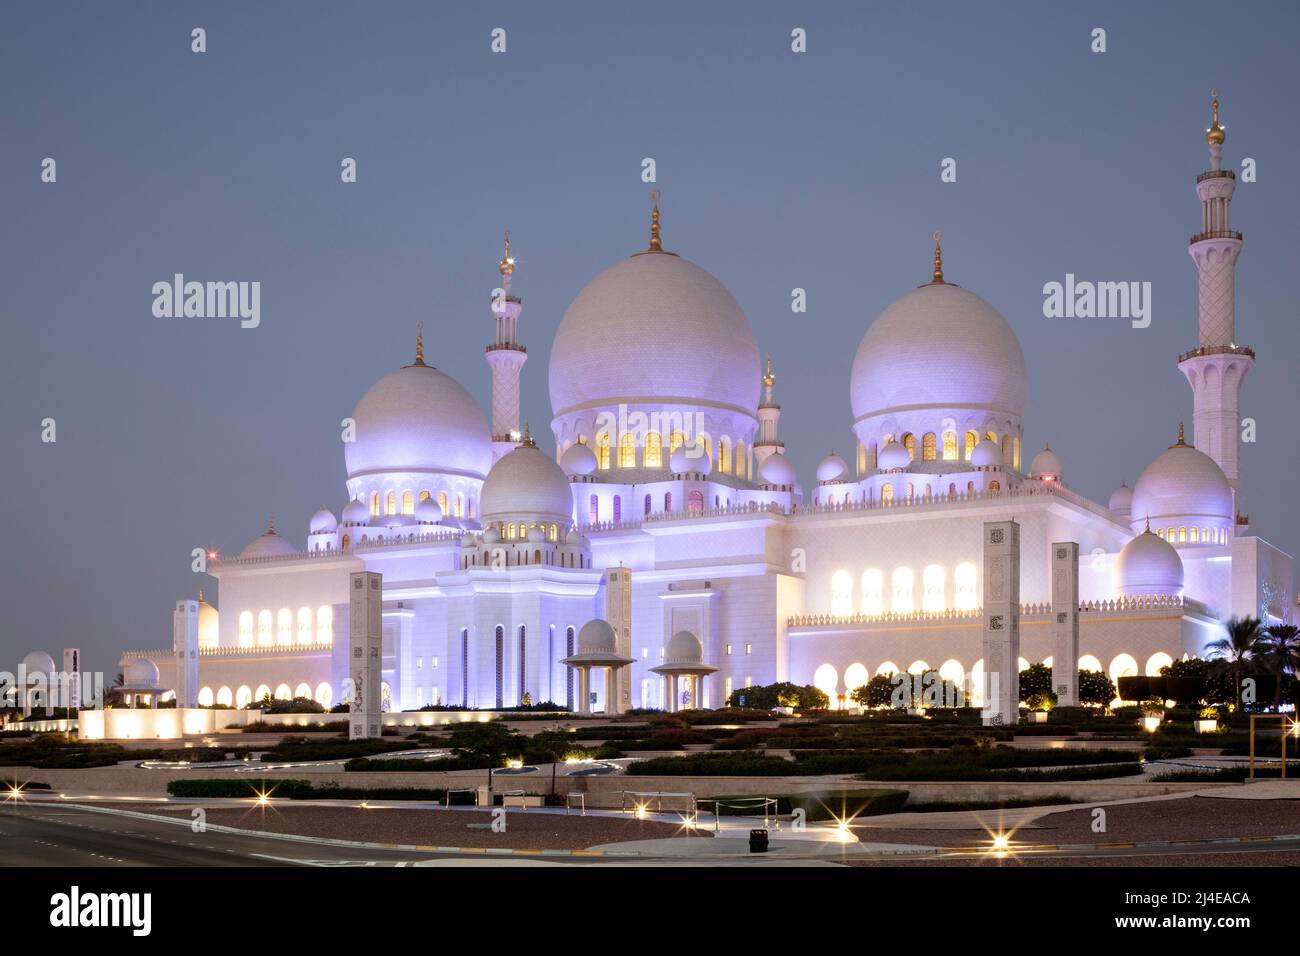 ABU DHABI, UNITED ARAB EMIRATES - October 23, 2021: The Sheikh Zayed Grand Mosque (SZGM) in Abu Dhabi at dusk / in the evening. Stock Photo